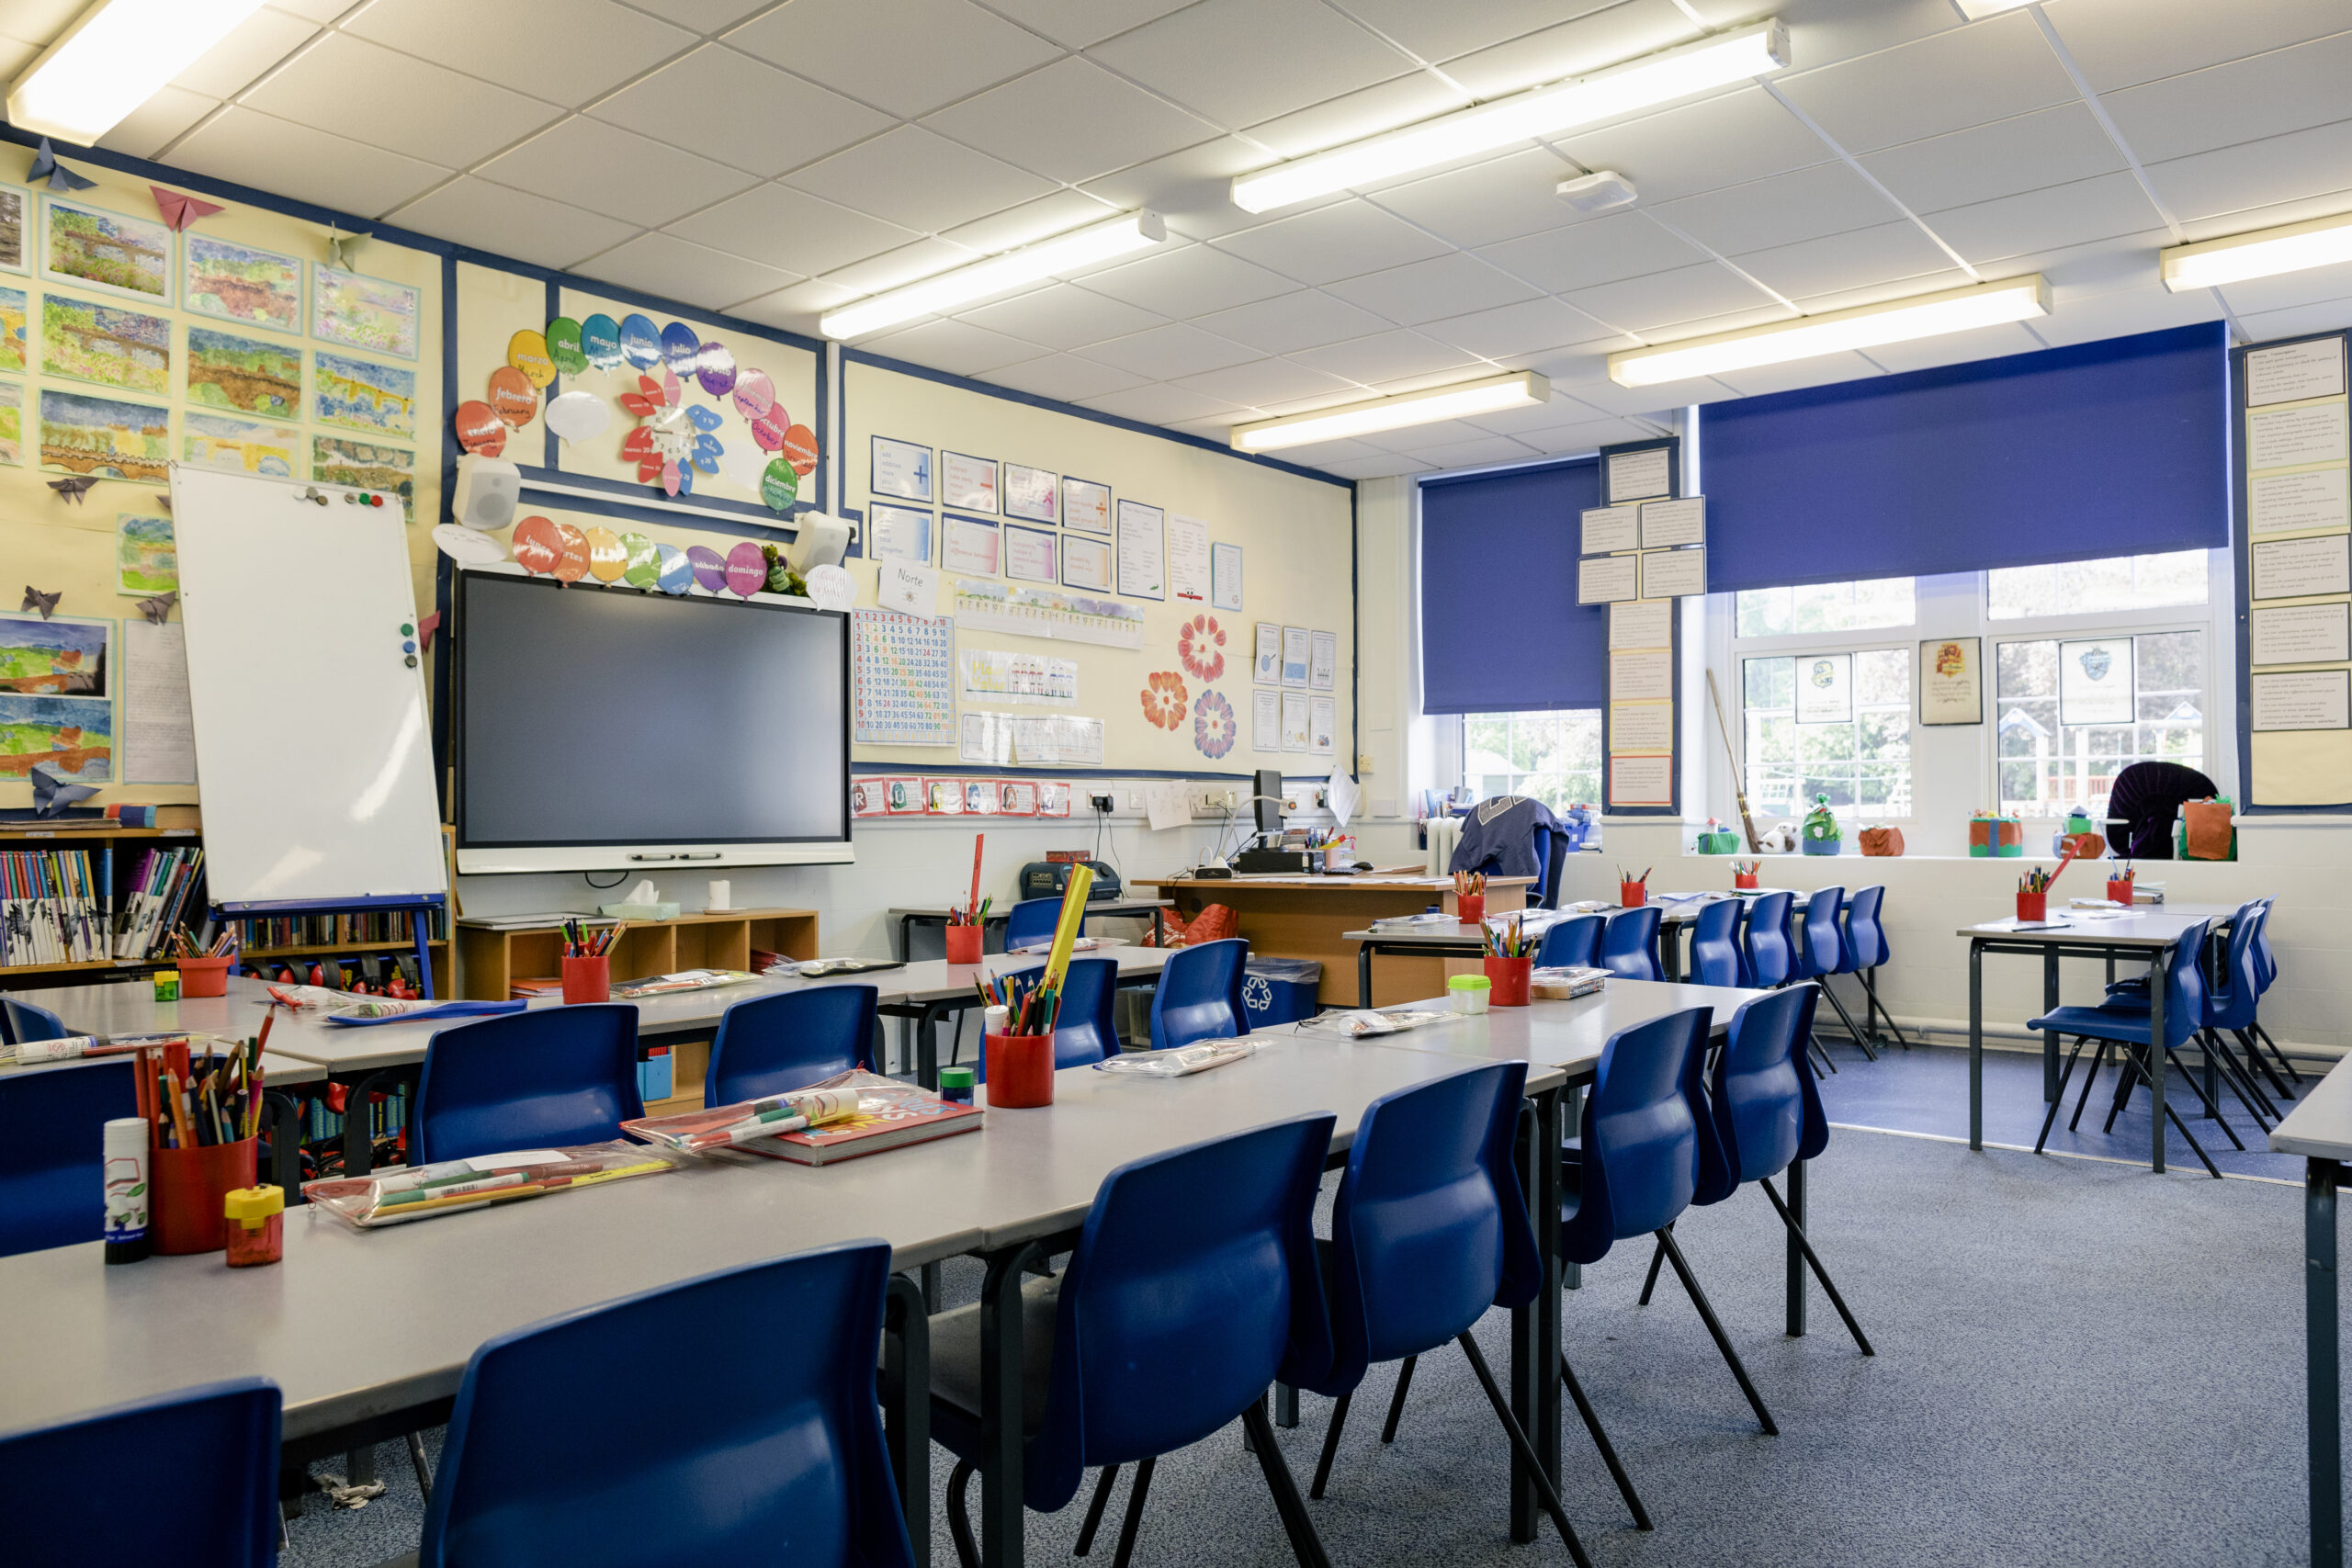 A wide angle view of an organised and tidy classroom in a school